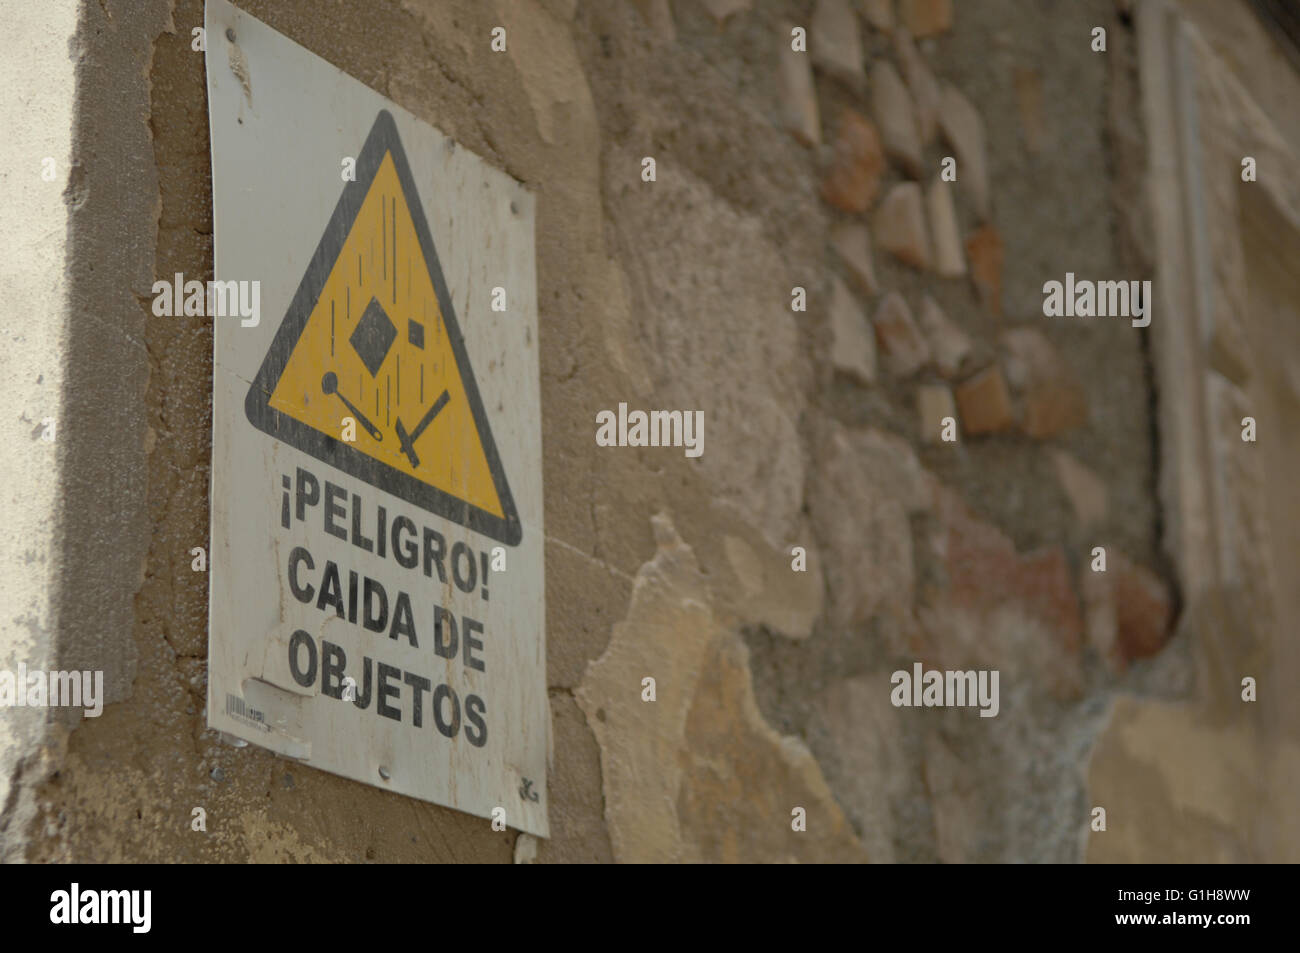 watch out for falling objects,caution,sign, Malaga,safety Stock Photo